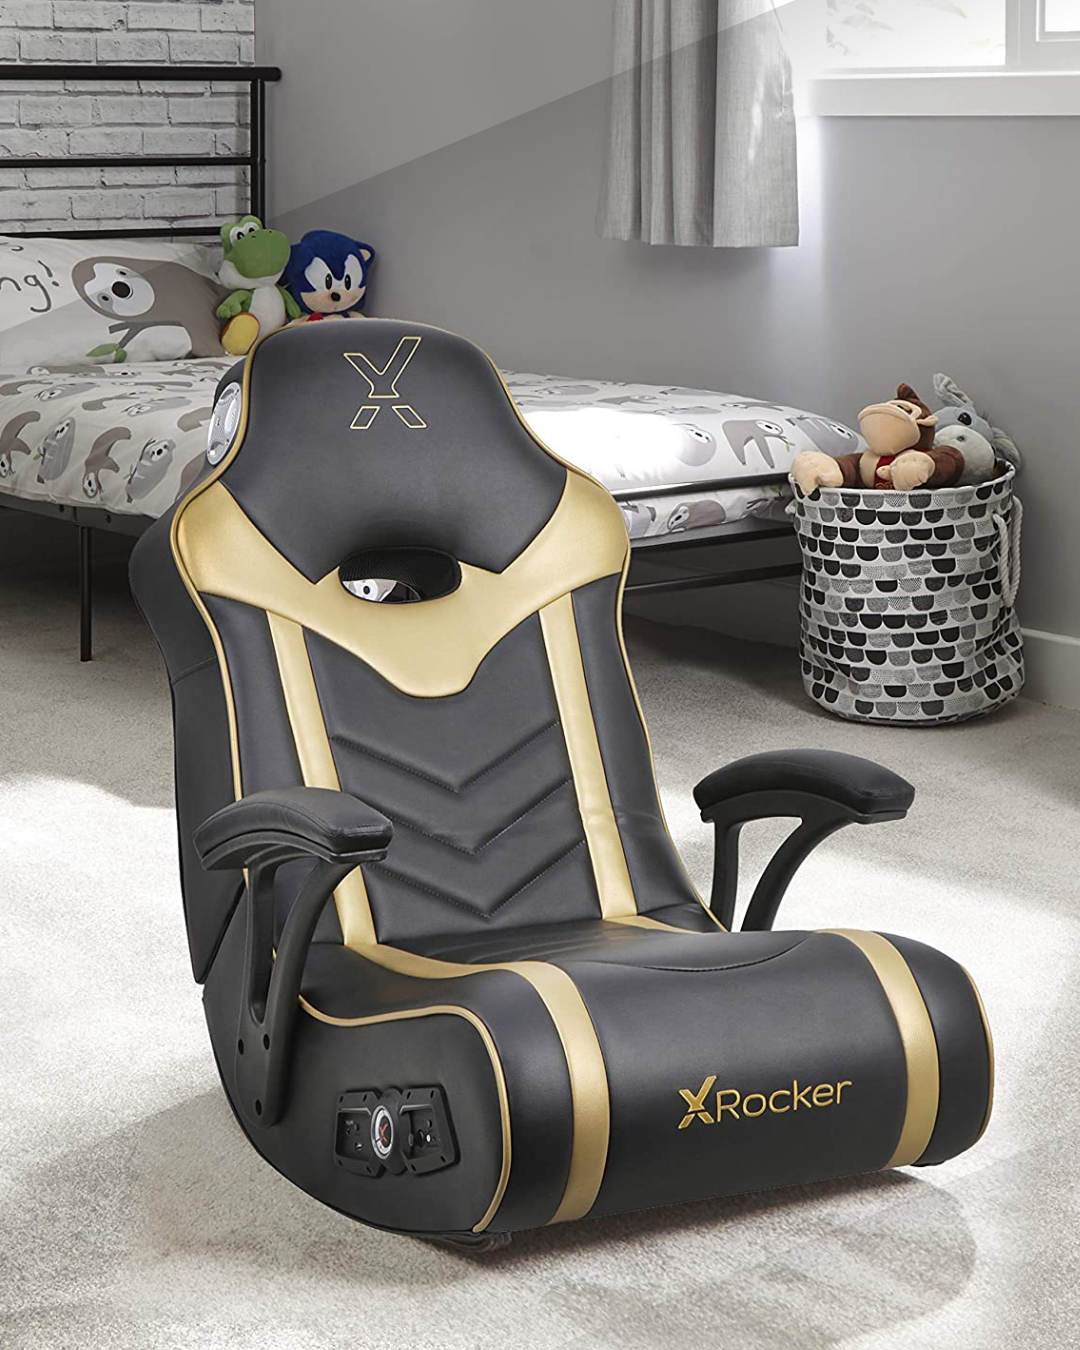 Get Ready to Level Up with the 4 Best Floor Gaming Chairs